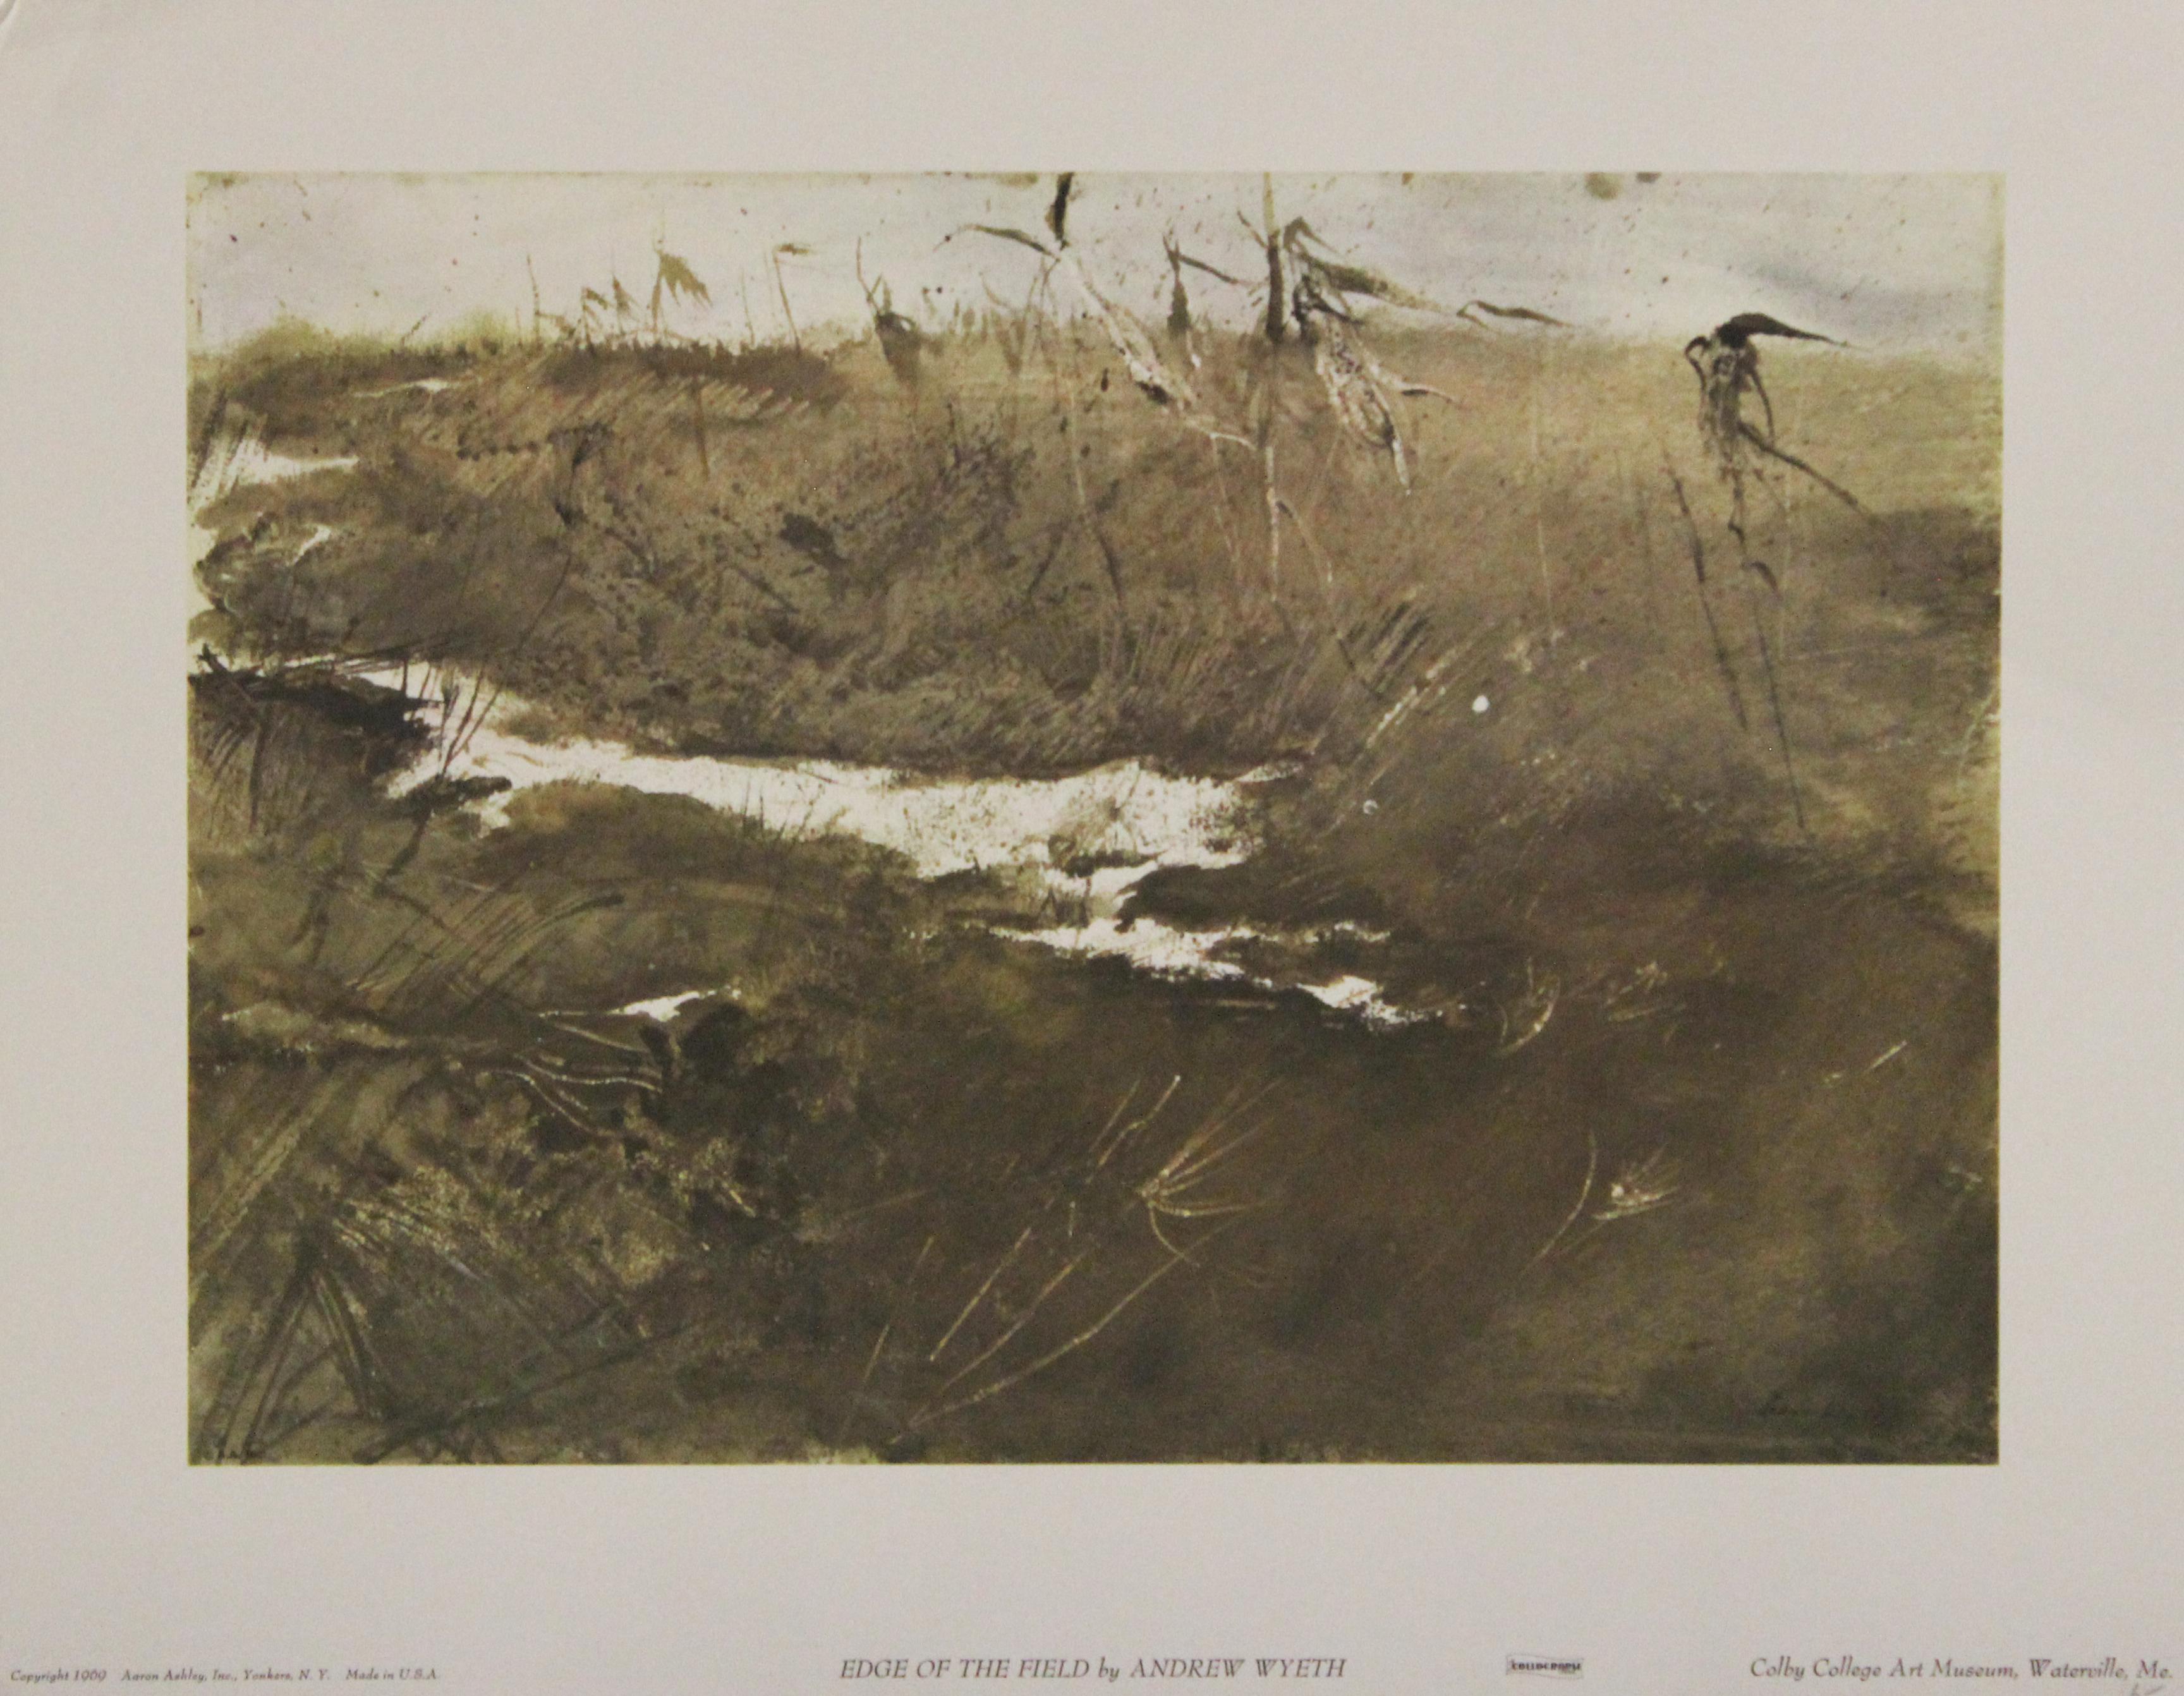 (after) Andrew Wyeth Landscape Print - Edge Of The Field-Poster. Copyright Aaron Ashley, Inc. 